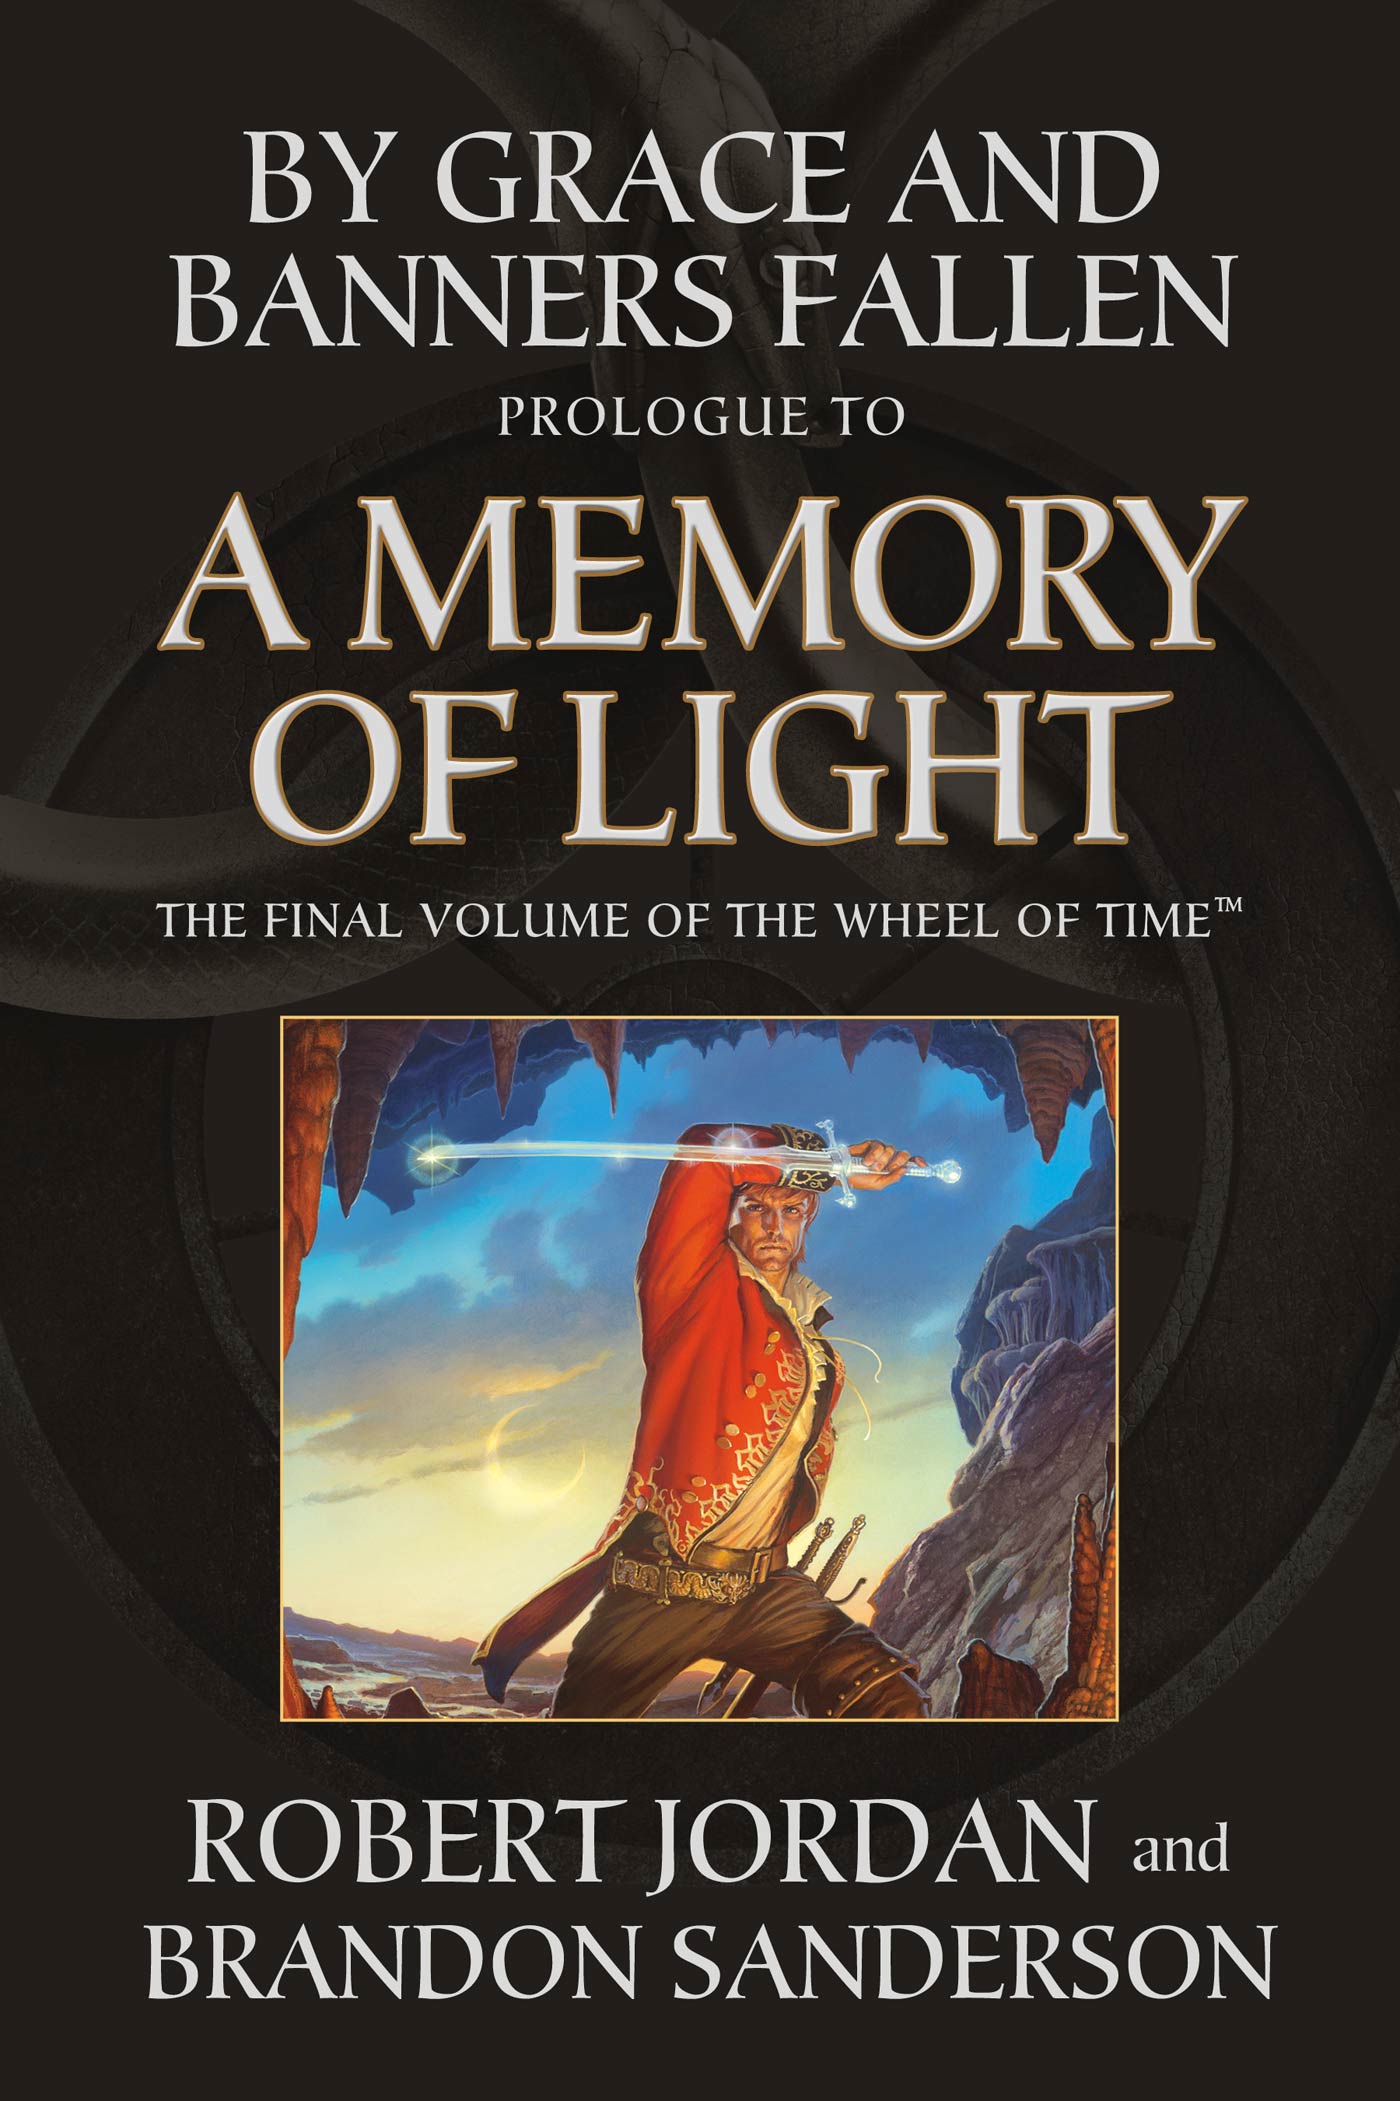 By Grace and Banners Fallen: Prologue to A Memory of Light by Robert Jordan, Brandon Sanderson